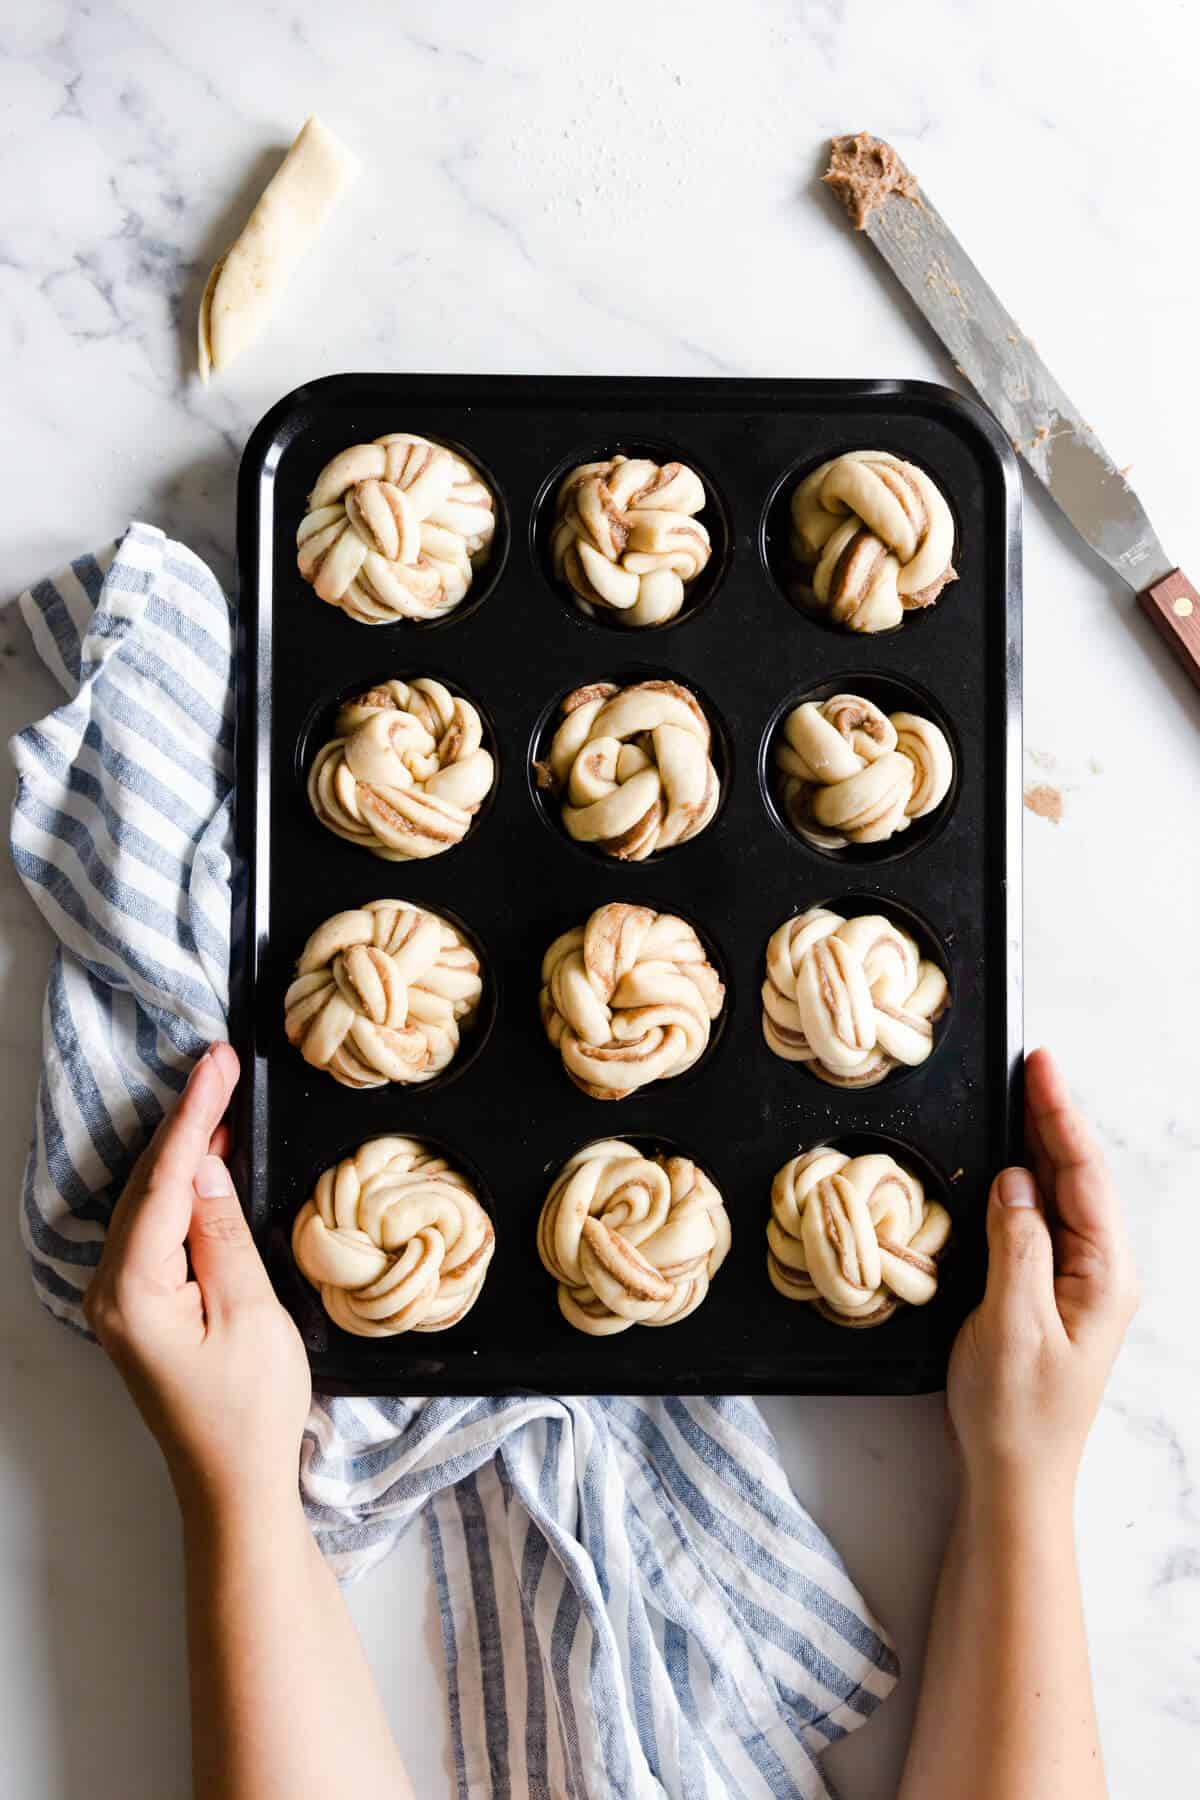 top view of a muffin tray filled with unbaked cinnamon buns